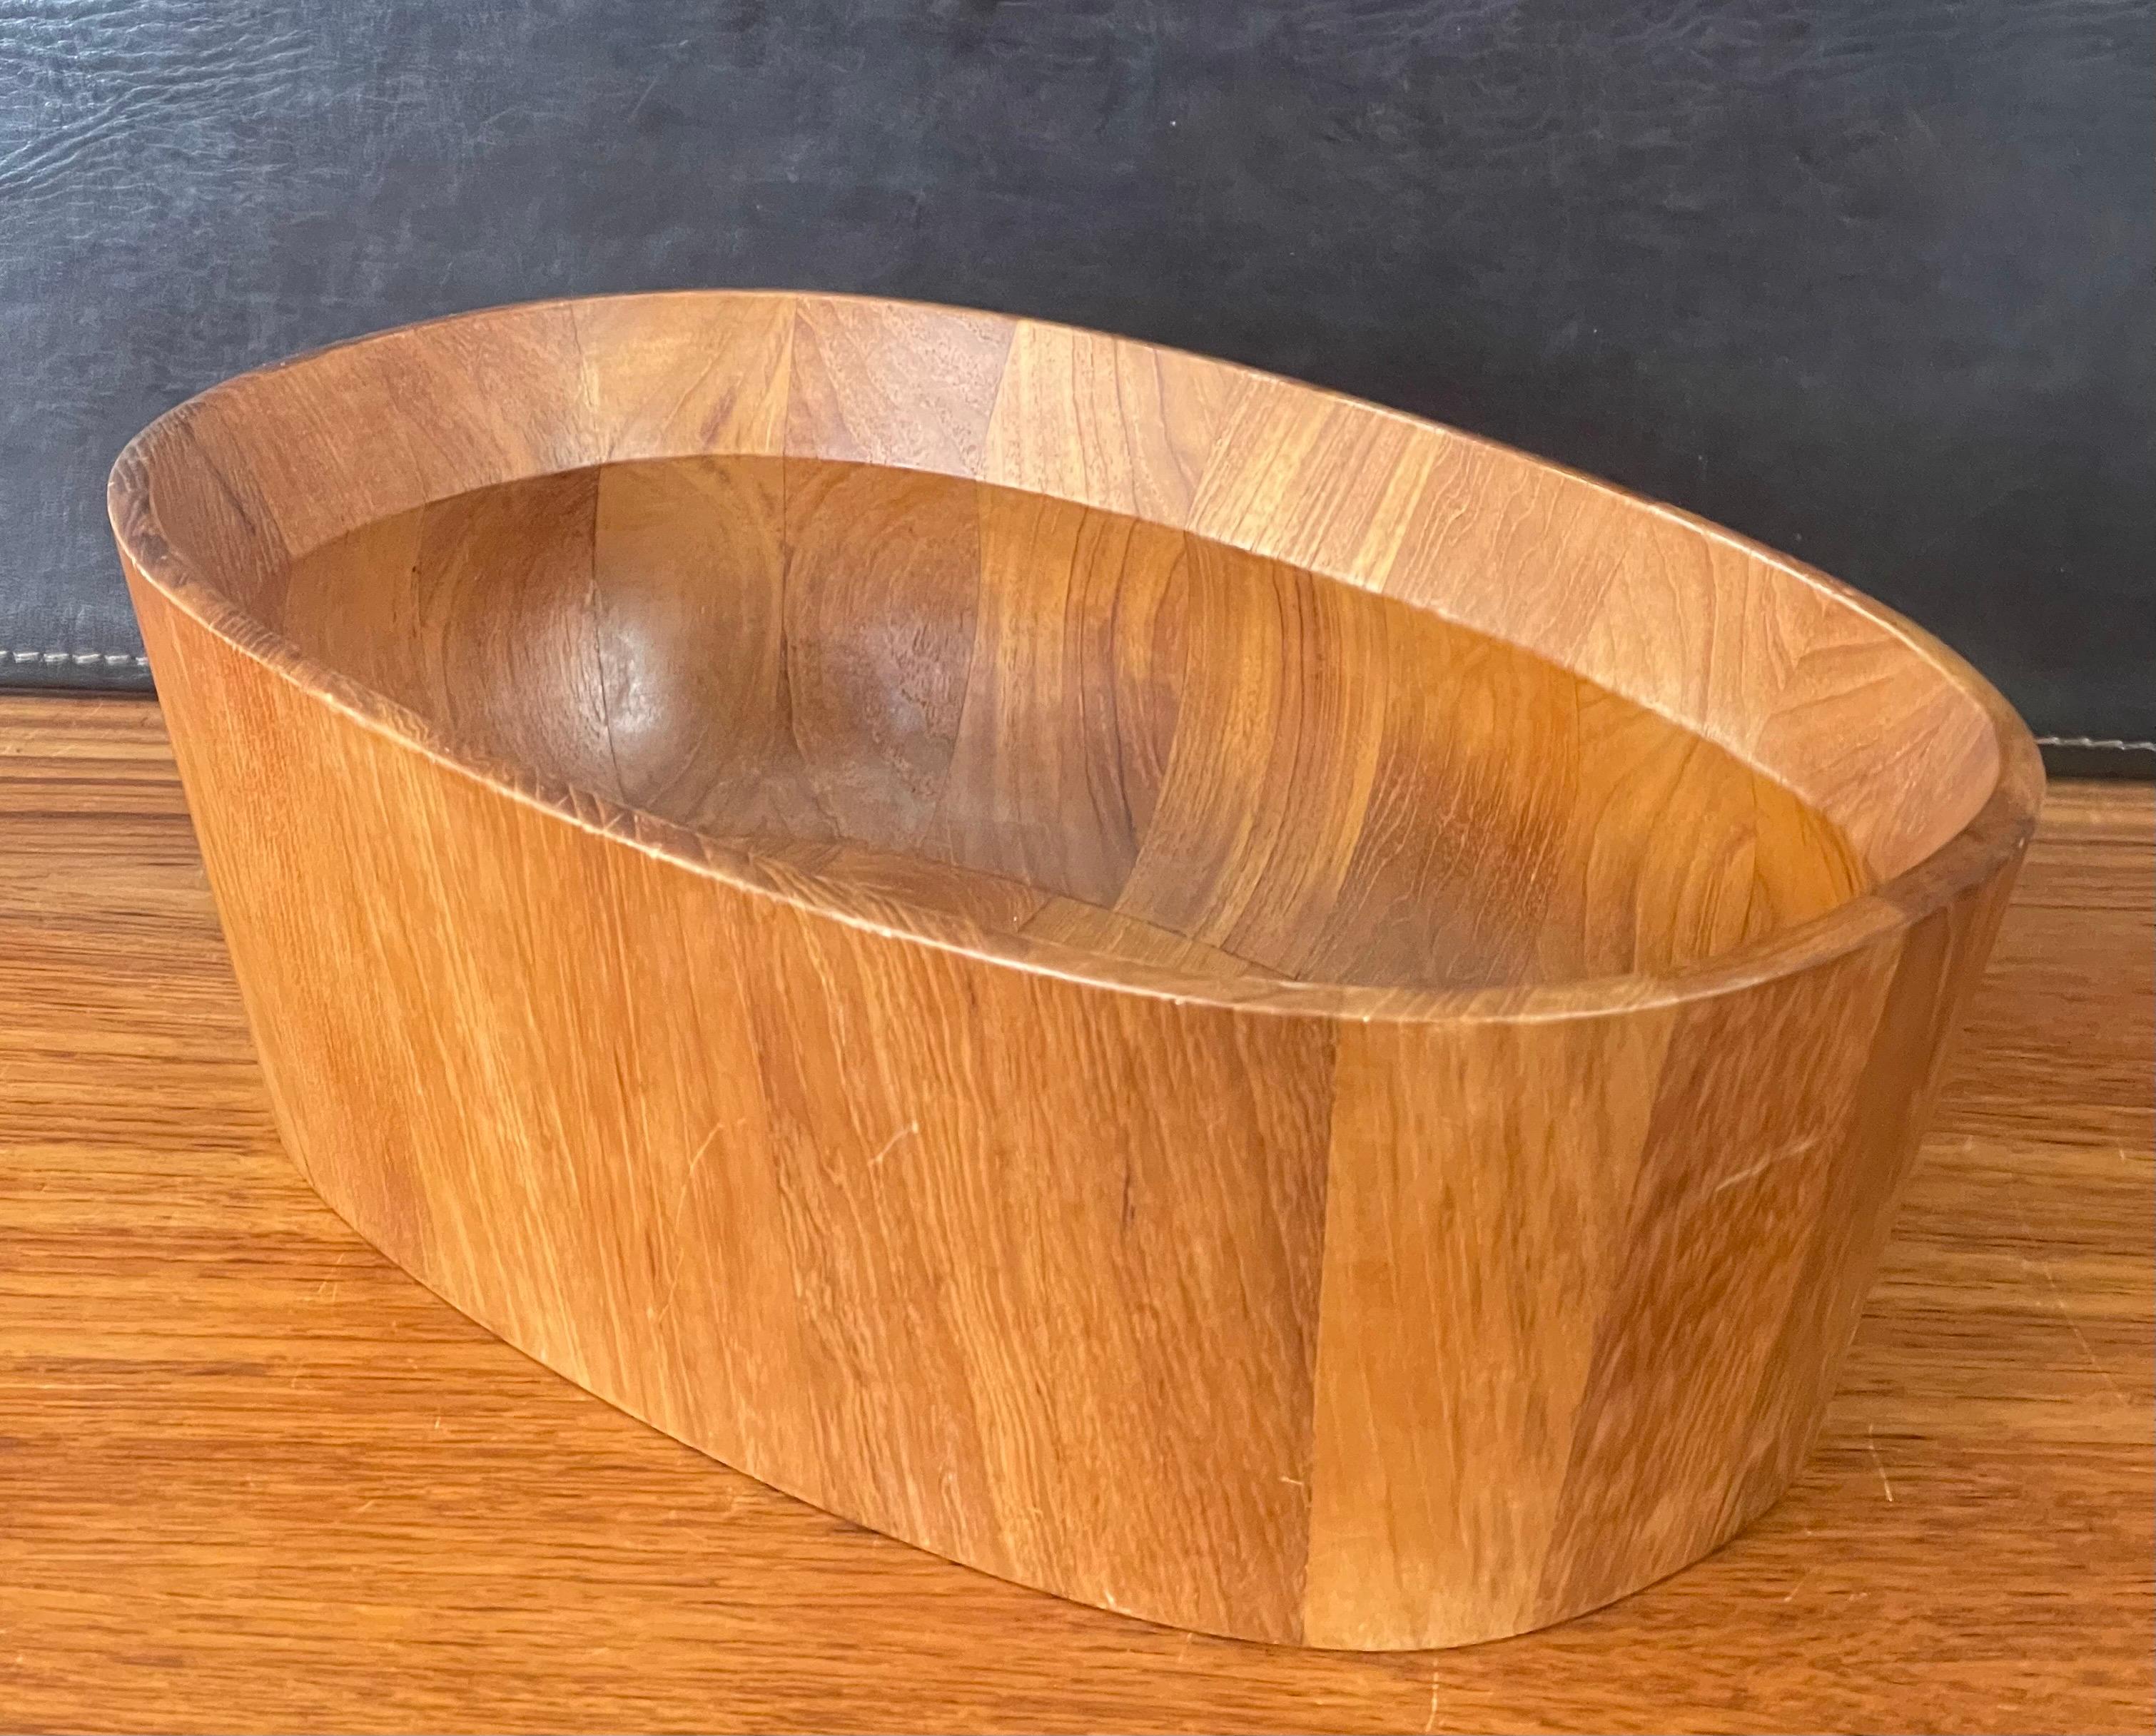 A very nice Danish modern oval shaped staved teak bowl by Jens Quistgaard for Dansk, circa 1960s. The bowl is in very good vintage condition and measures 14